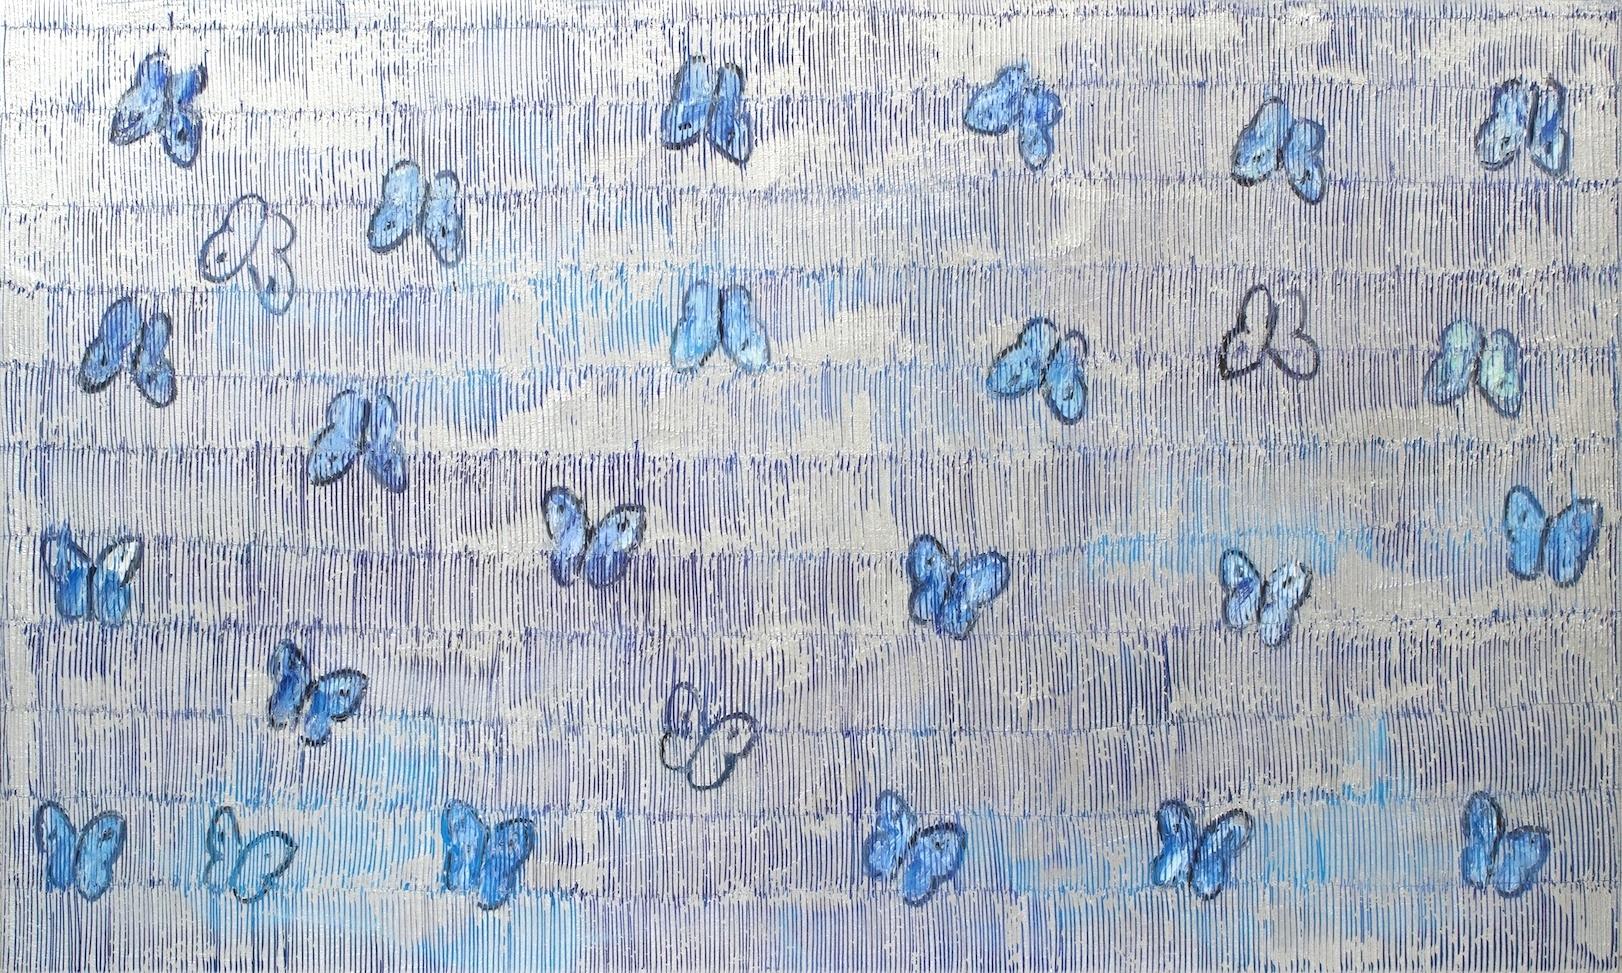 Silver and blue butterflies - Painting by Hunt Slonem